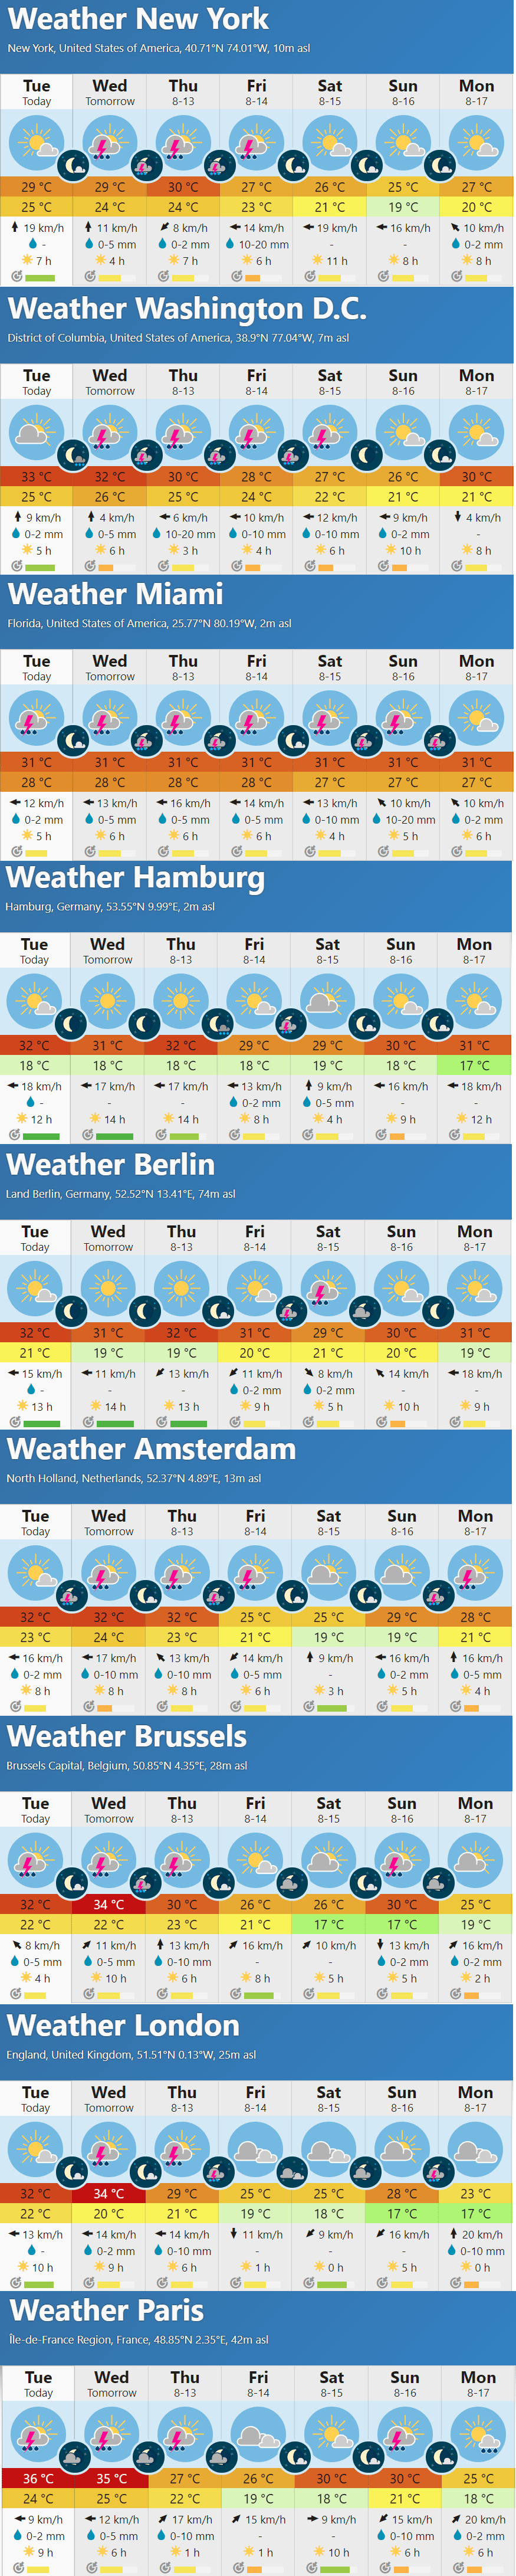 weather-aug-2020.png